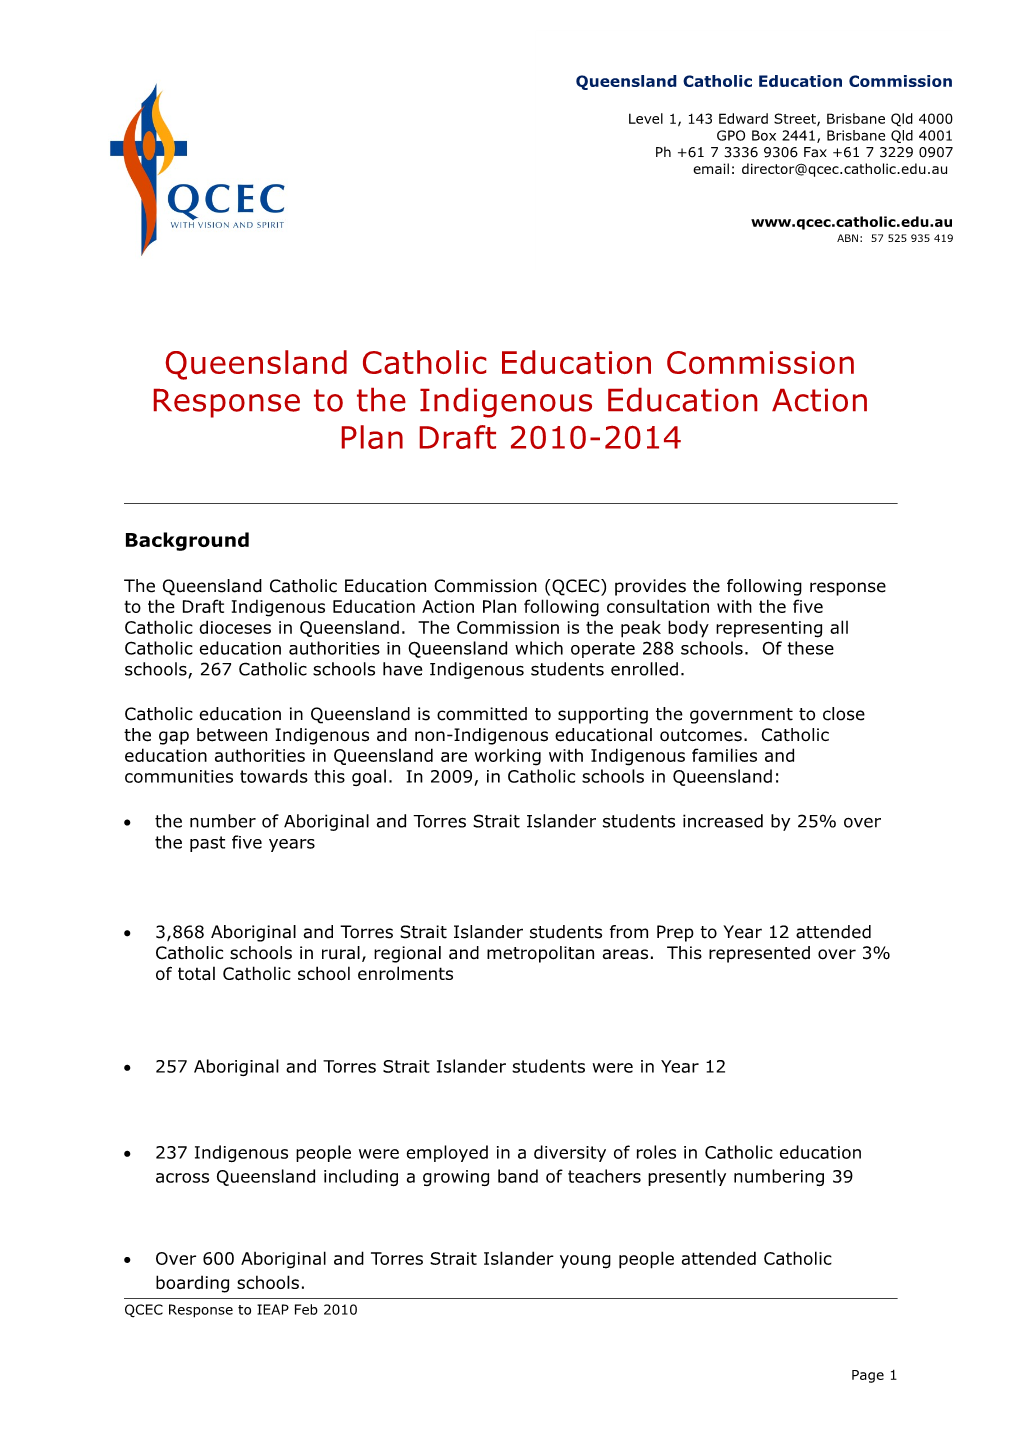 Queensland Catholic Education Commission Response to the Indigenous Education Action Plan